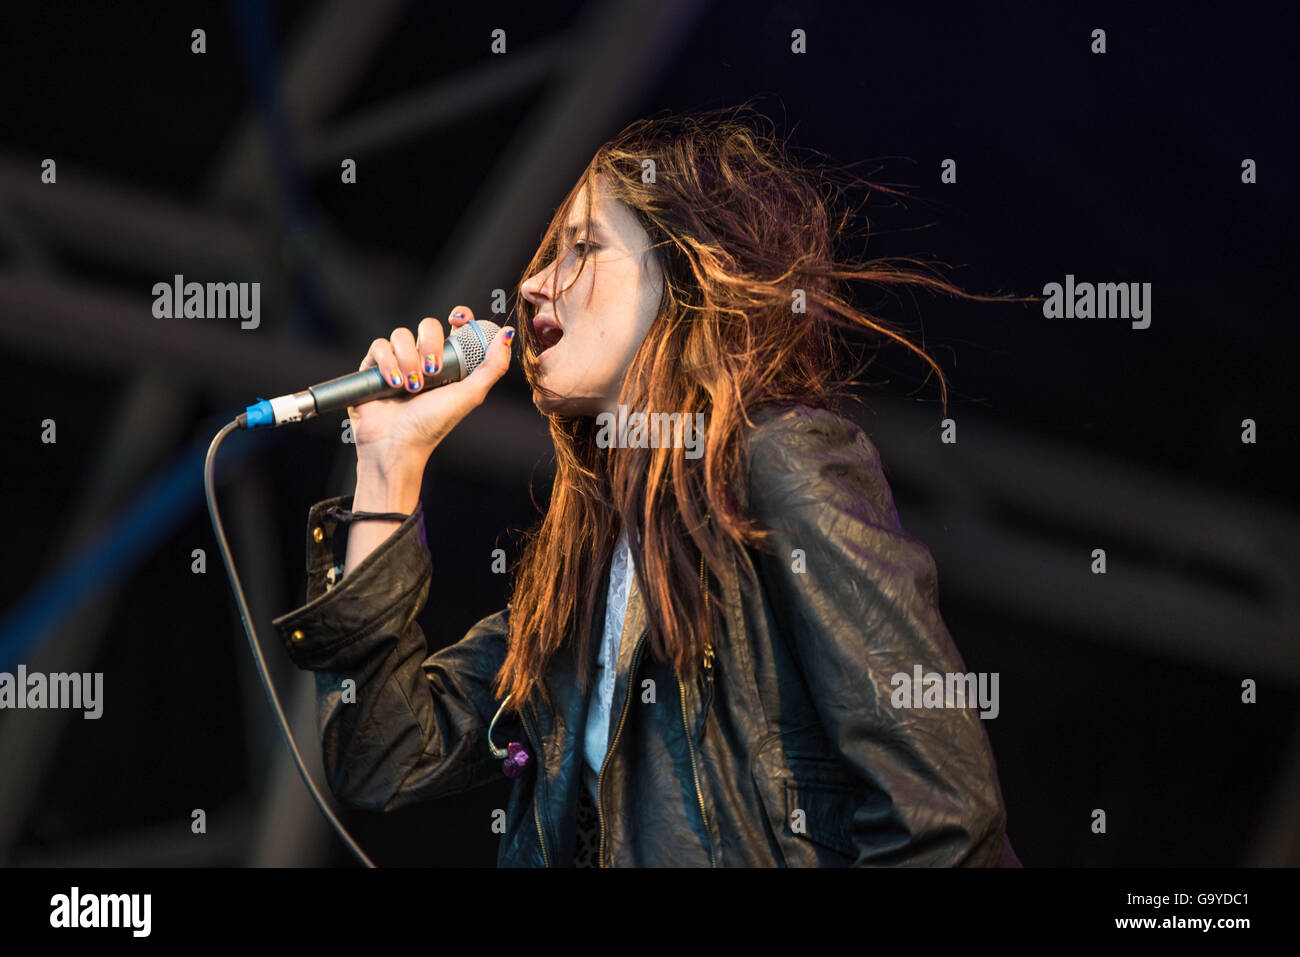 London, UK. 1st July, 2016. London, UK. 1st July, 2016. Theresa Wayman of Warpaint performs on stage as part of the Barclaycard Presents British Summer Time Hyde Park, on July 1, 2016 in London, England. Credit:  Michael Jamison/Alamy Live News Stock Photo